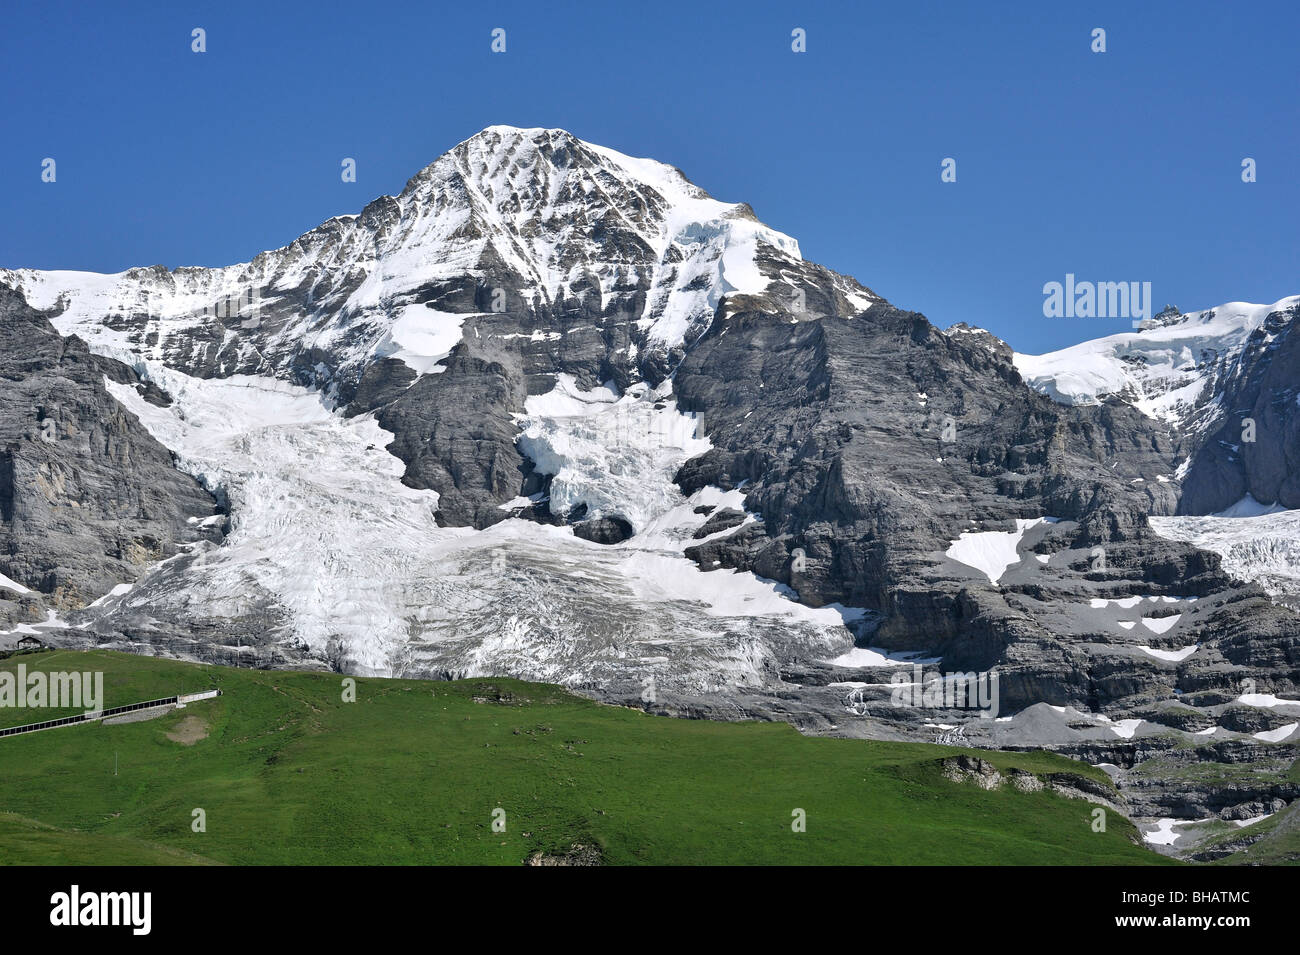 The Mönch forms part of a mountain ridge between the Jungfrau and the Eiger in the Bernese Alps, Switzerland Stock Photo